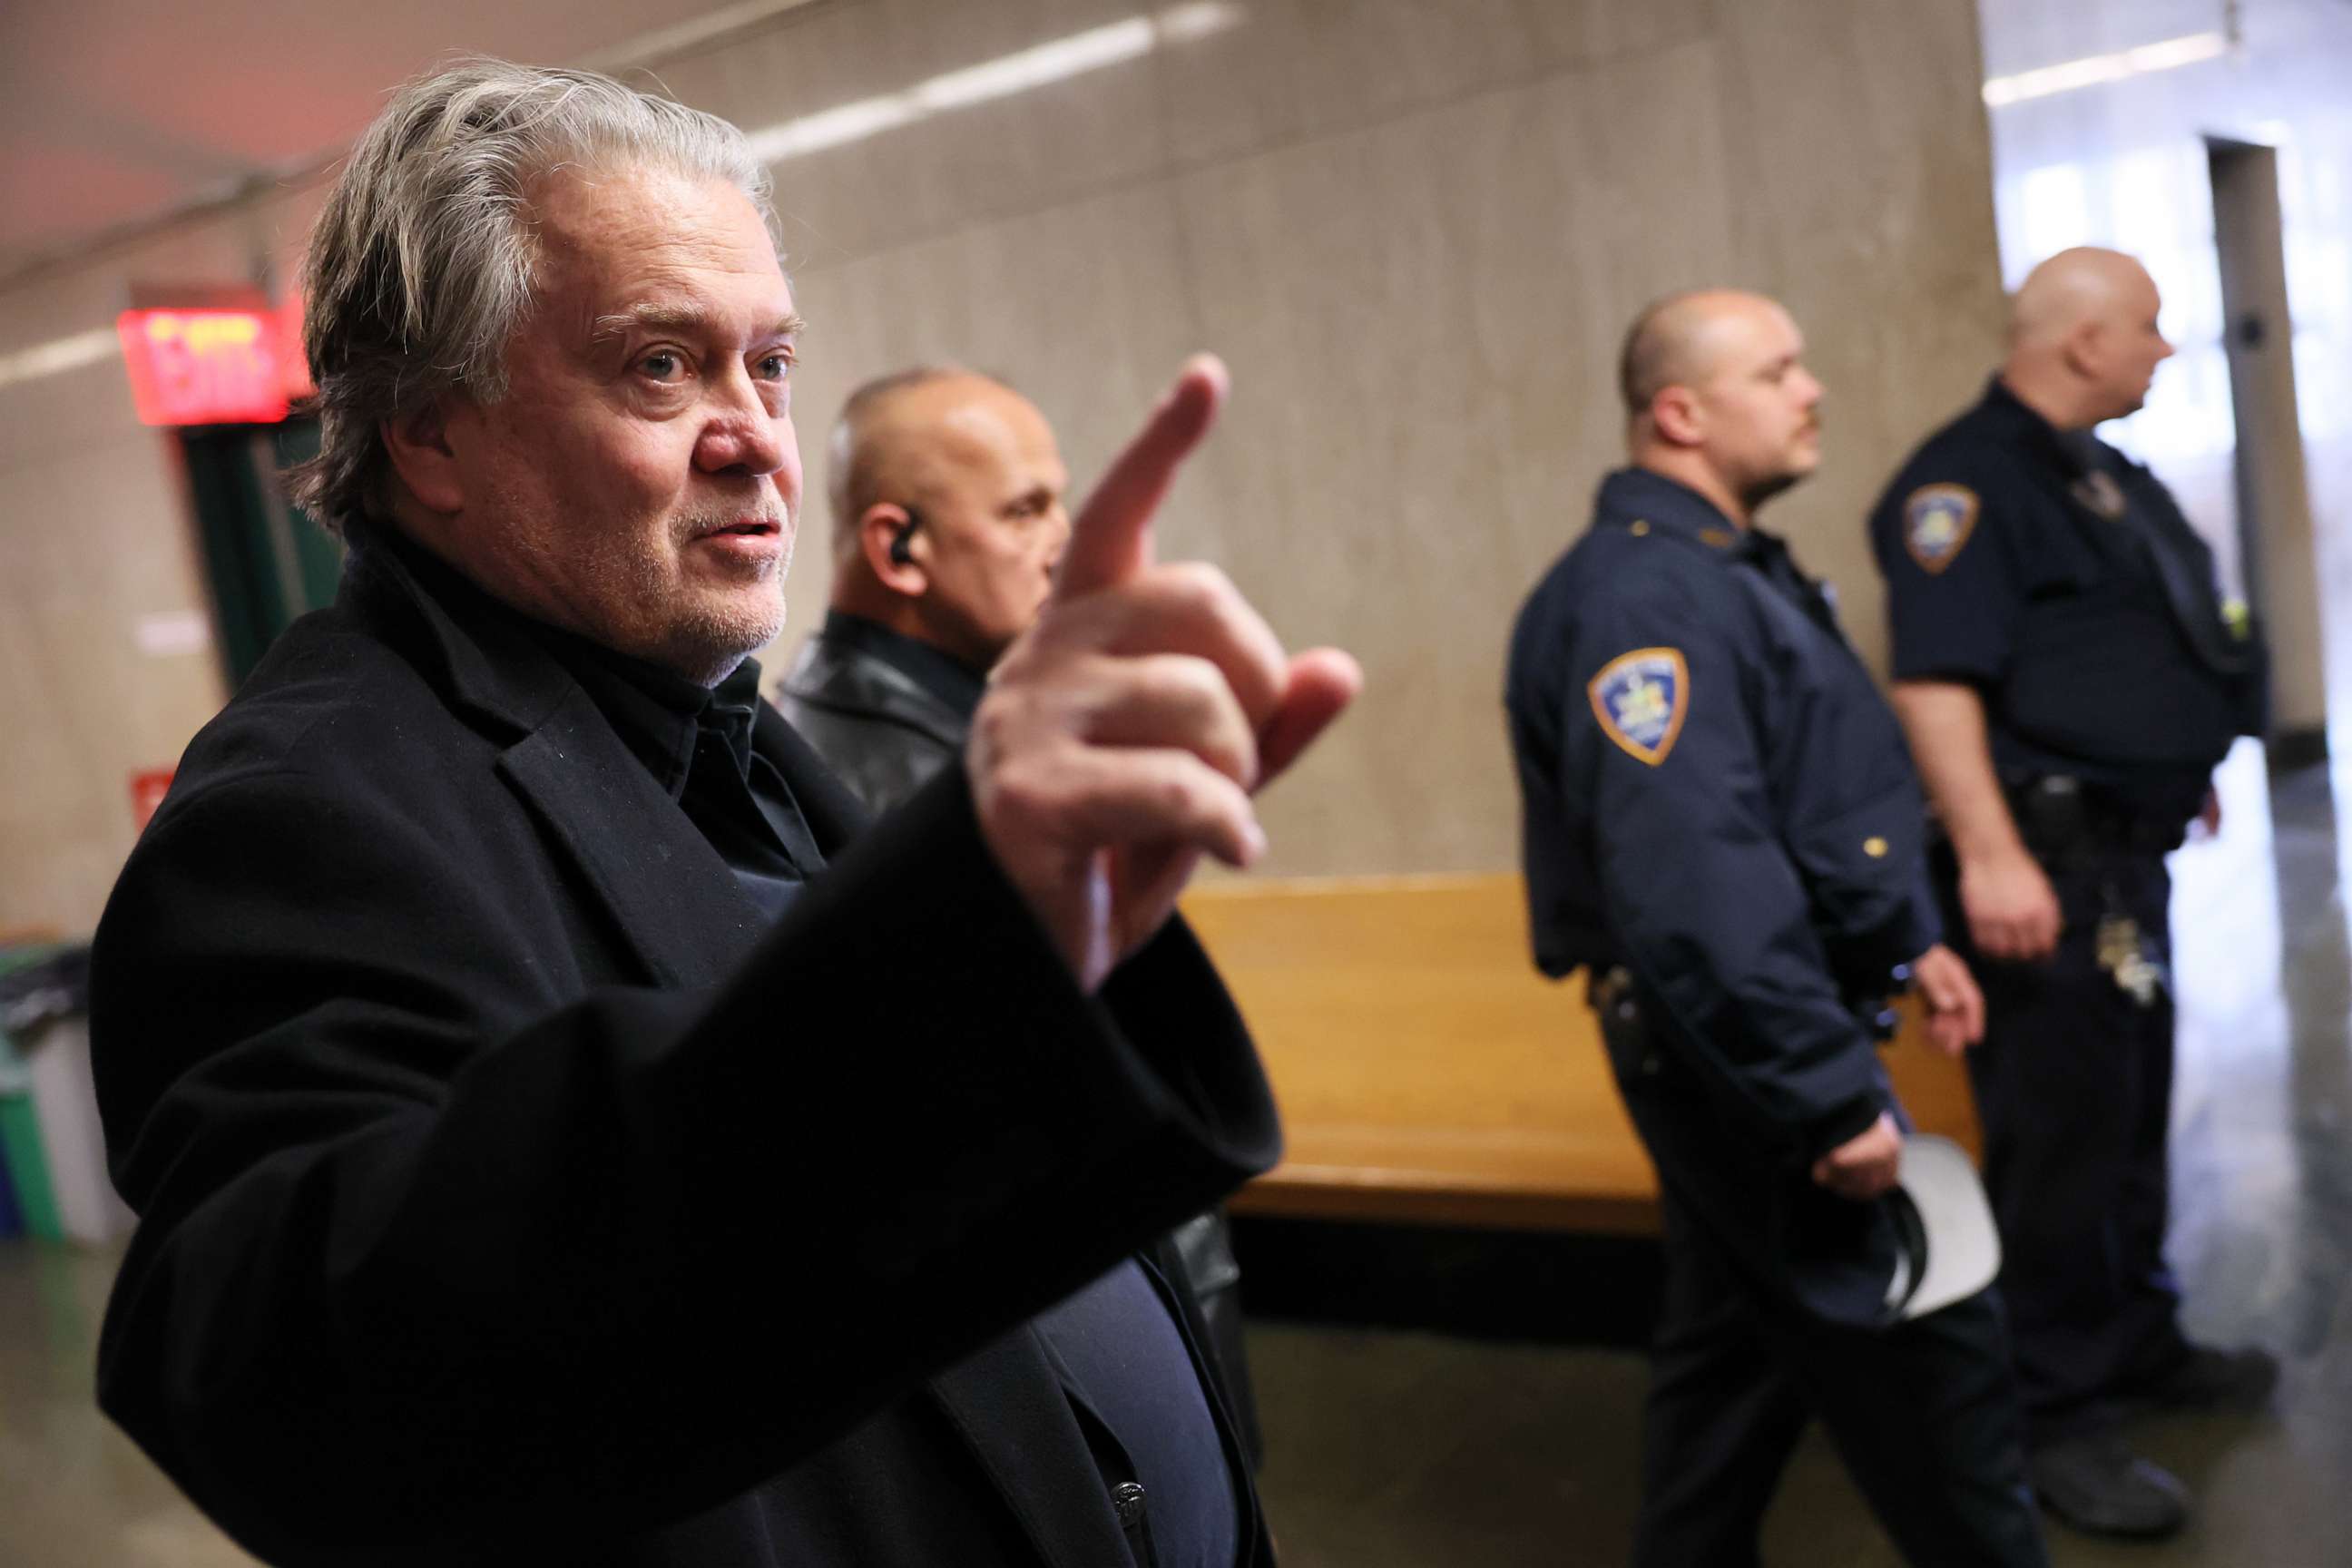 PHOTO: Steve Bannon, former adviser to President Donald Trump, points as he speaks after leaving a court appearance at NYS Supreme Court on Feb. 28, 2023, in New York City.